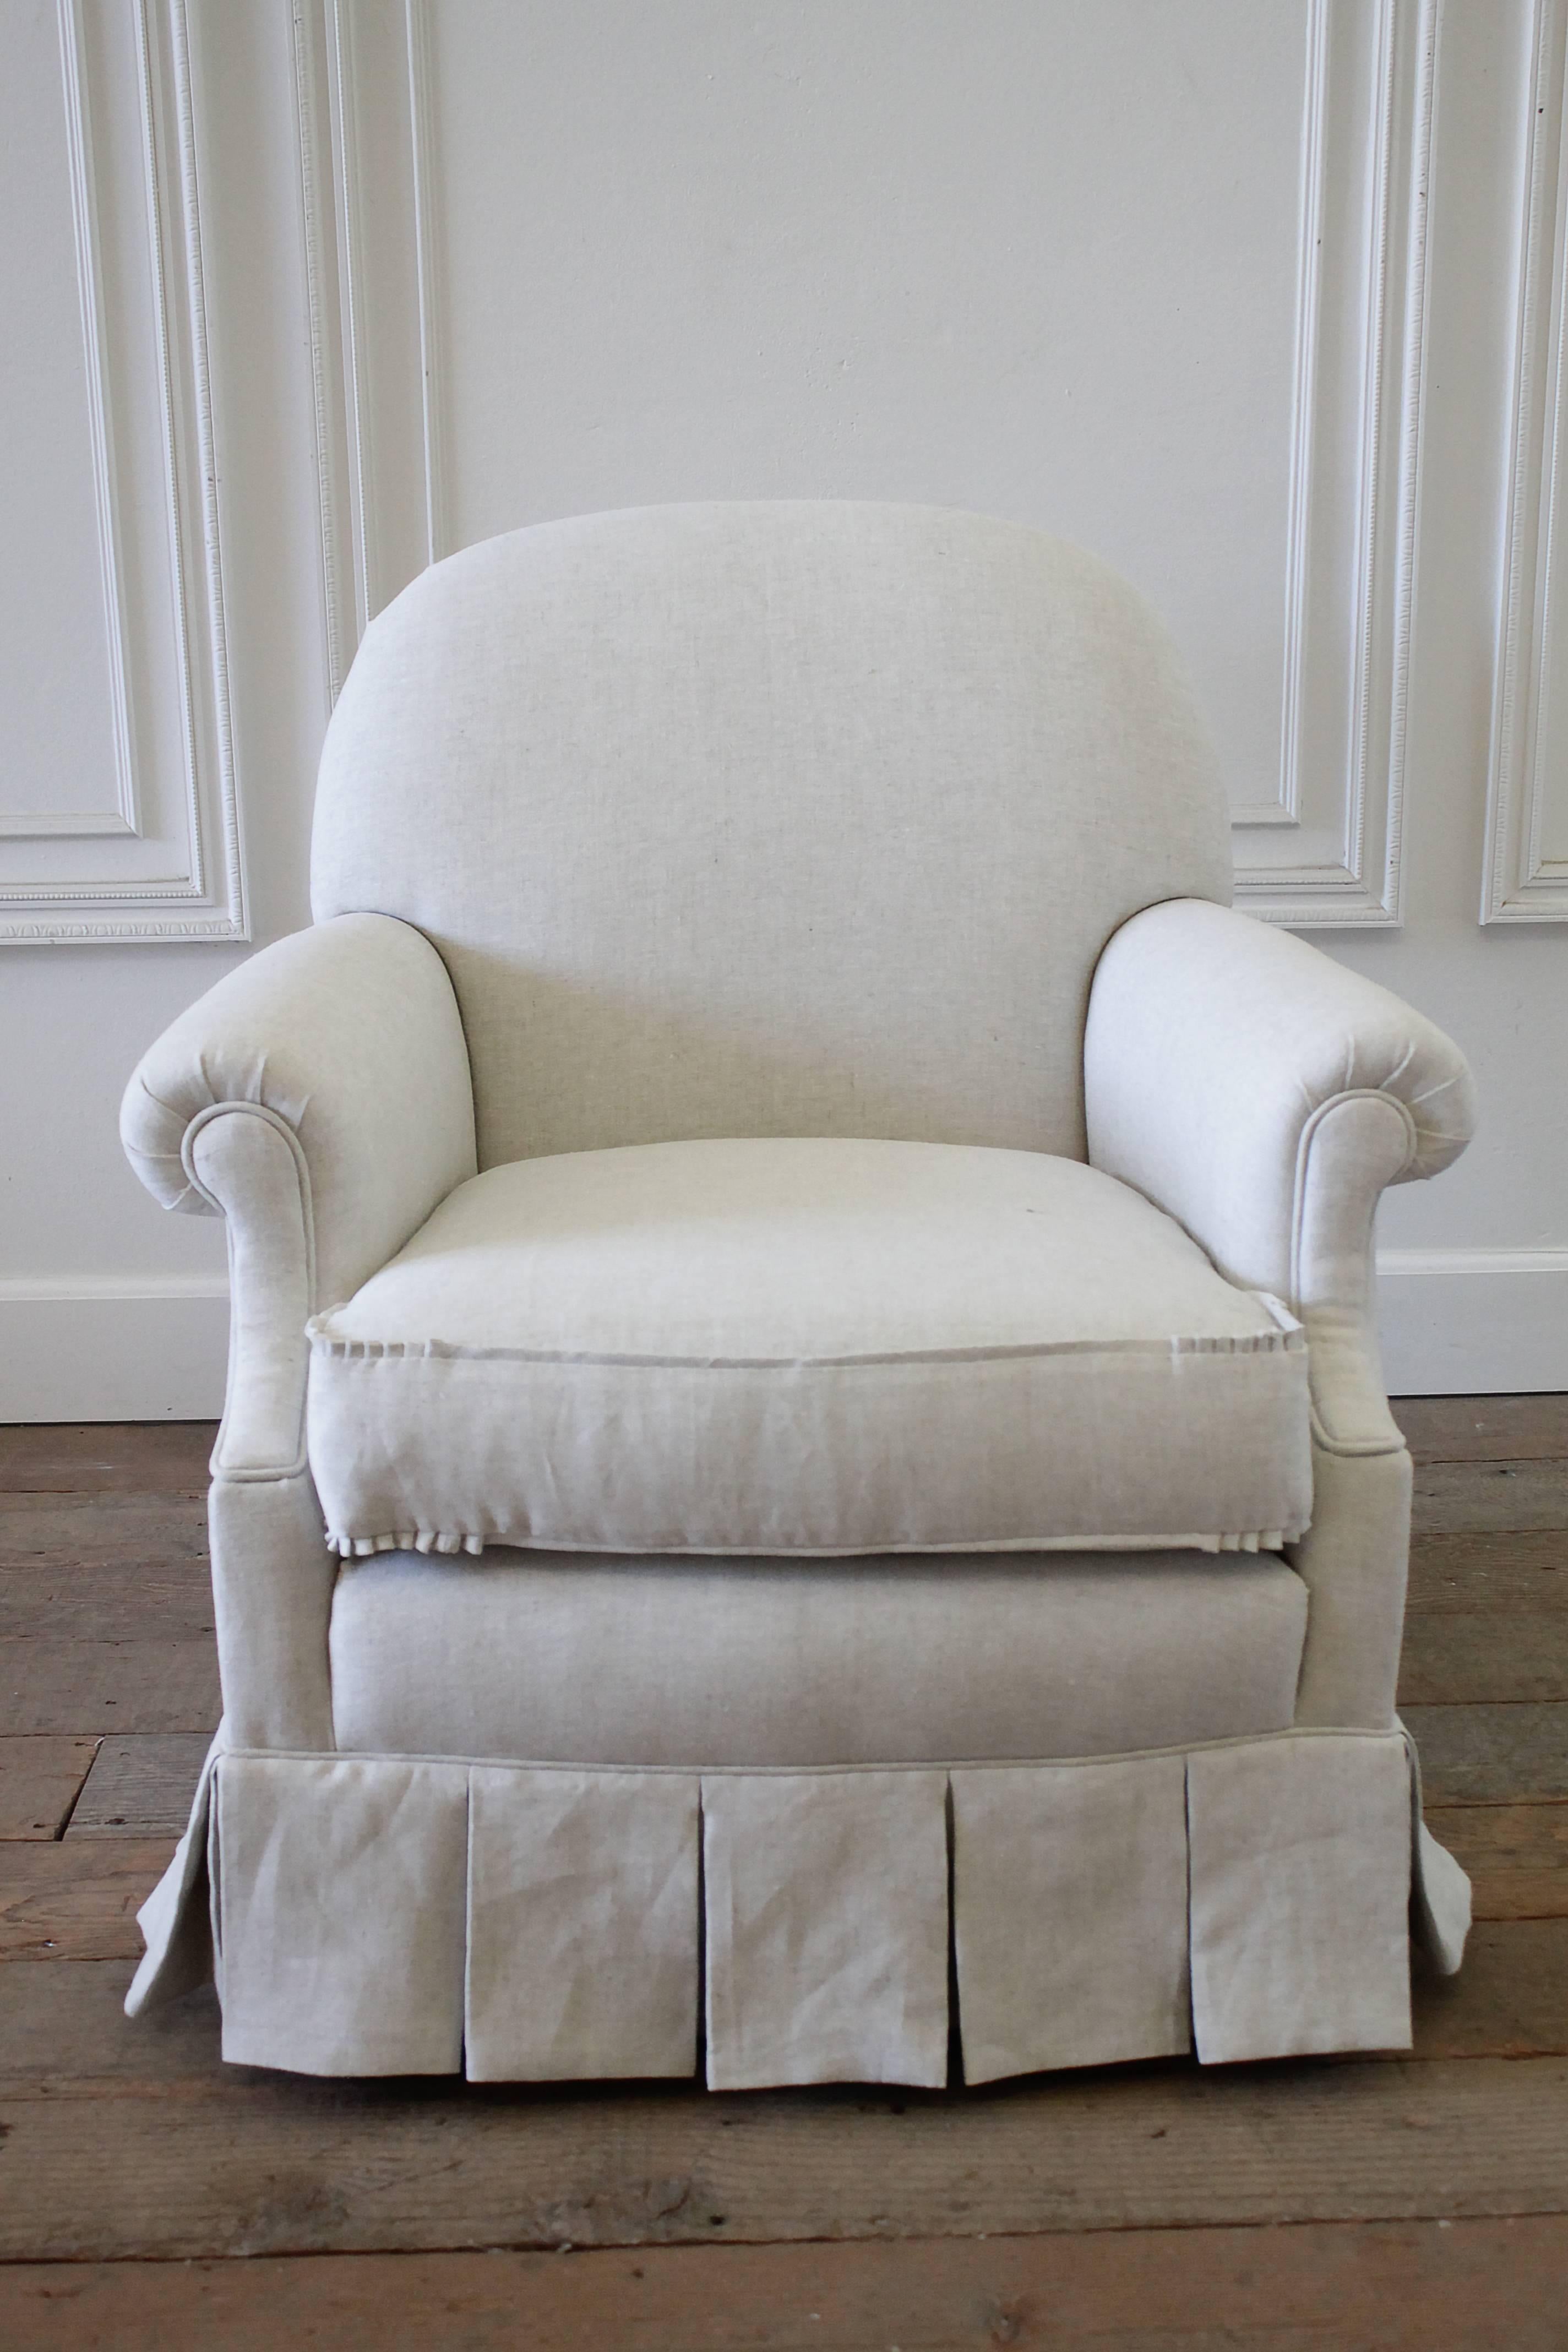 Vintage chair with custom upholstered linen box pleated ruffle skirt.
If you sat in this chair you would want to purchase it, it is so comfortable! The perfect vintage chair reupholstered in our organic Belgian linen, a soft light natural color.